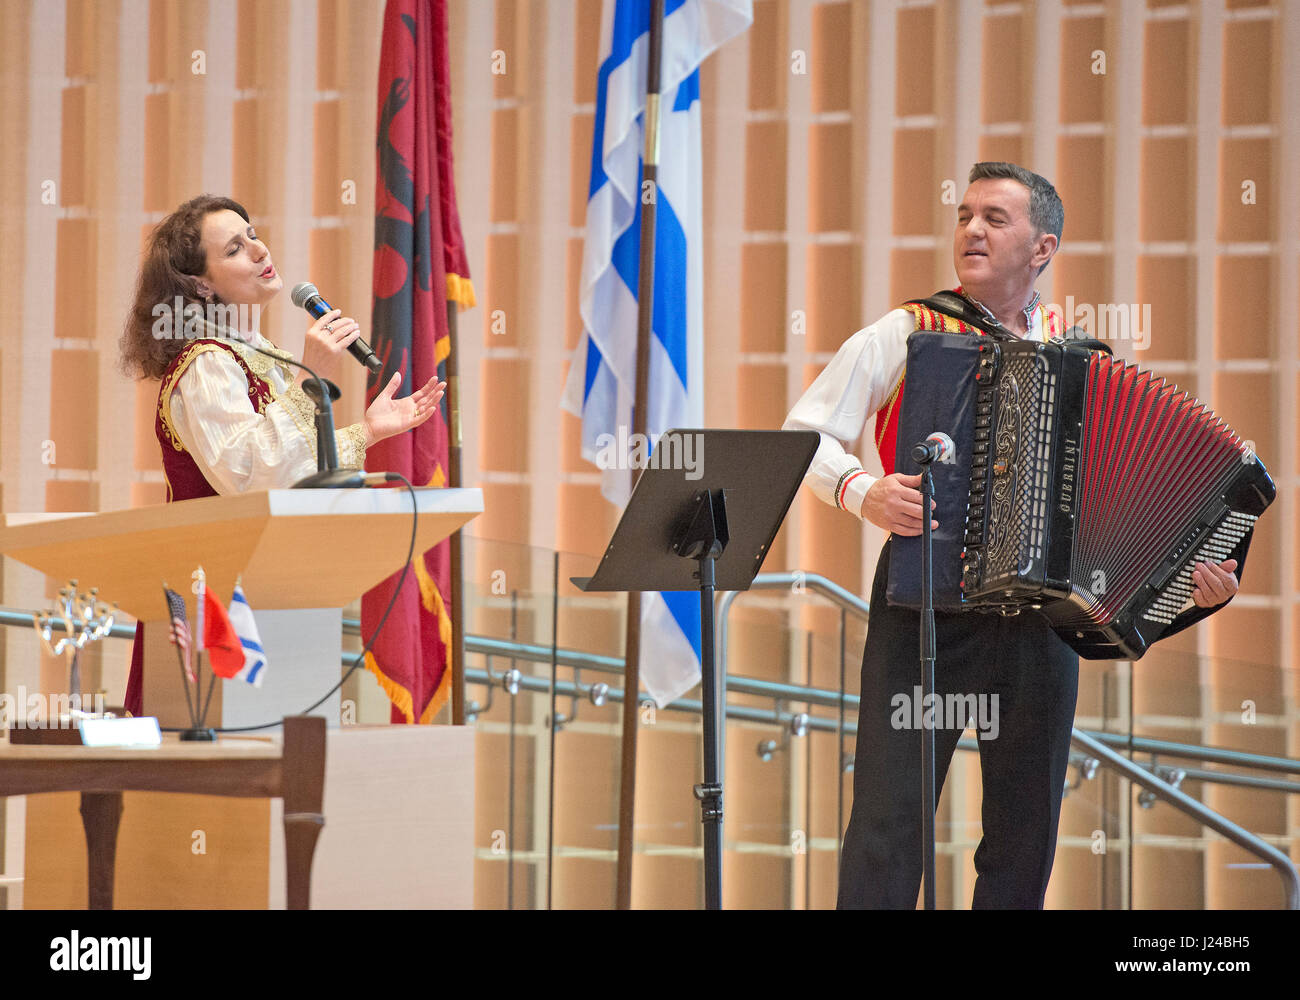 Several hundred people gather Sunday, April 23, 2017 at Washington, DC·s Adas Israel Congregation to commemorate Yom Hashoah, Holocaust Remembrance Day, with the synagogue·s annual Garden of the Righteous ceremony, honoring non-Jews who risked their lives to save Jews during the Holocaust. This year·s honoree was the Veseli family from Albania, who sheltered two Jewish families in Kruja, Albania during World War II. At the ceremony, Albanian folk musicians Raif Hyseni (R) and Merita Halili perform in honor of the Veseli family. Credit: Ron Sachs/CNP - NO WIRE SERVICE - Photo: Ron Sachs Stock Photo